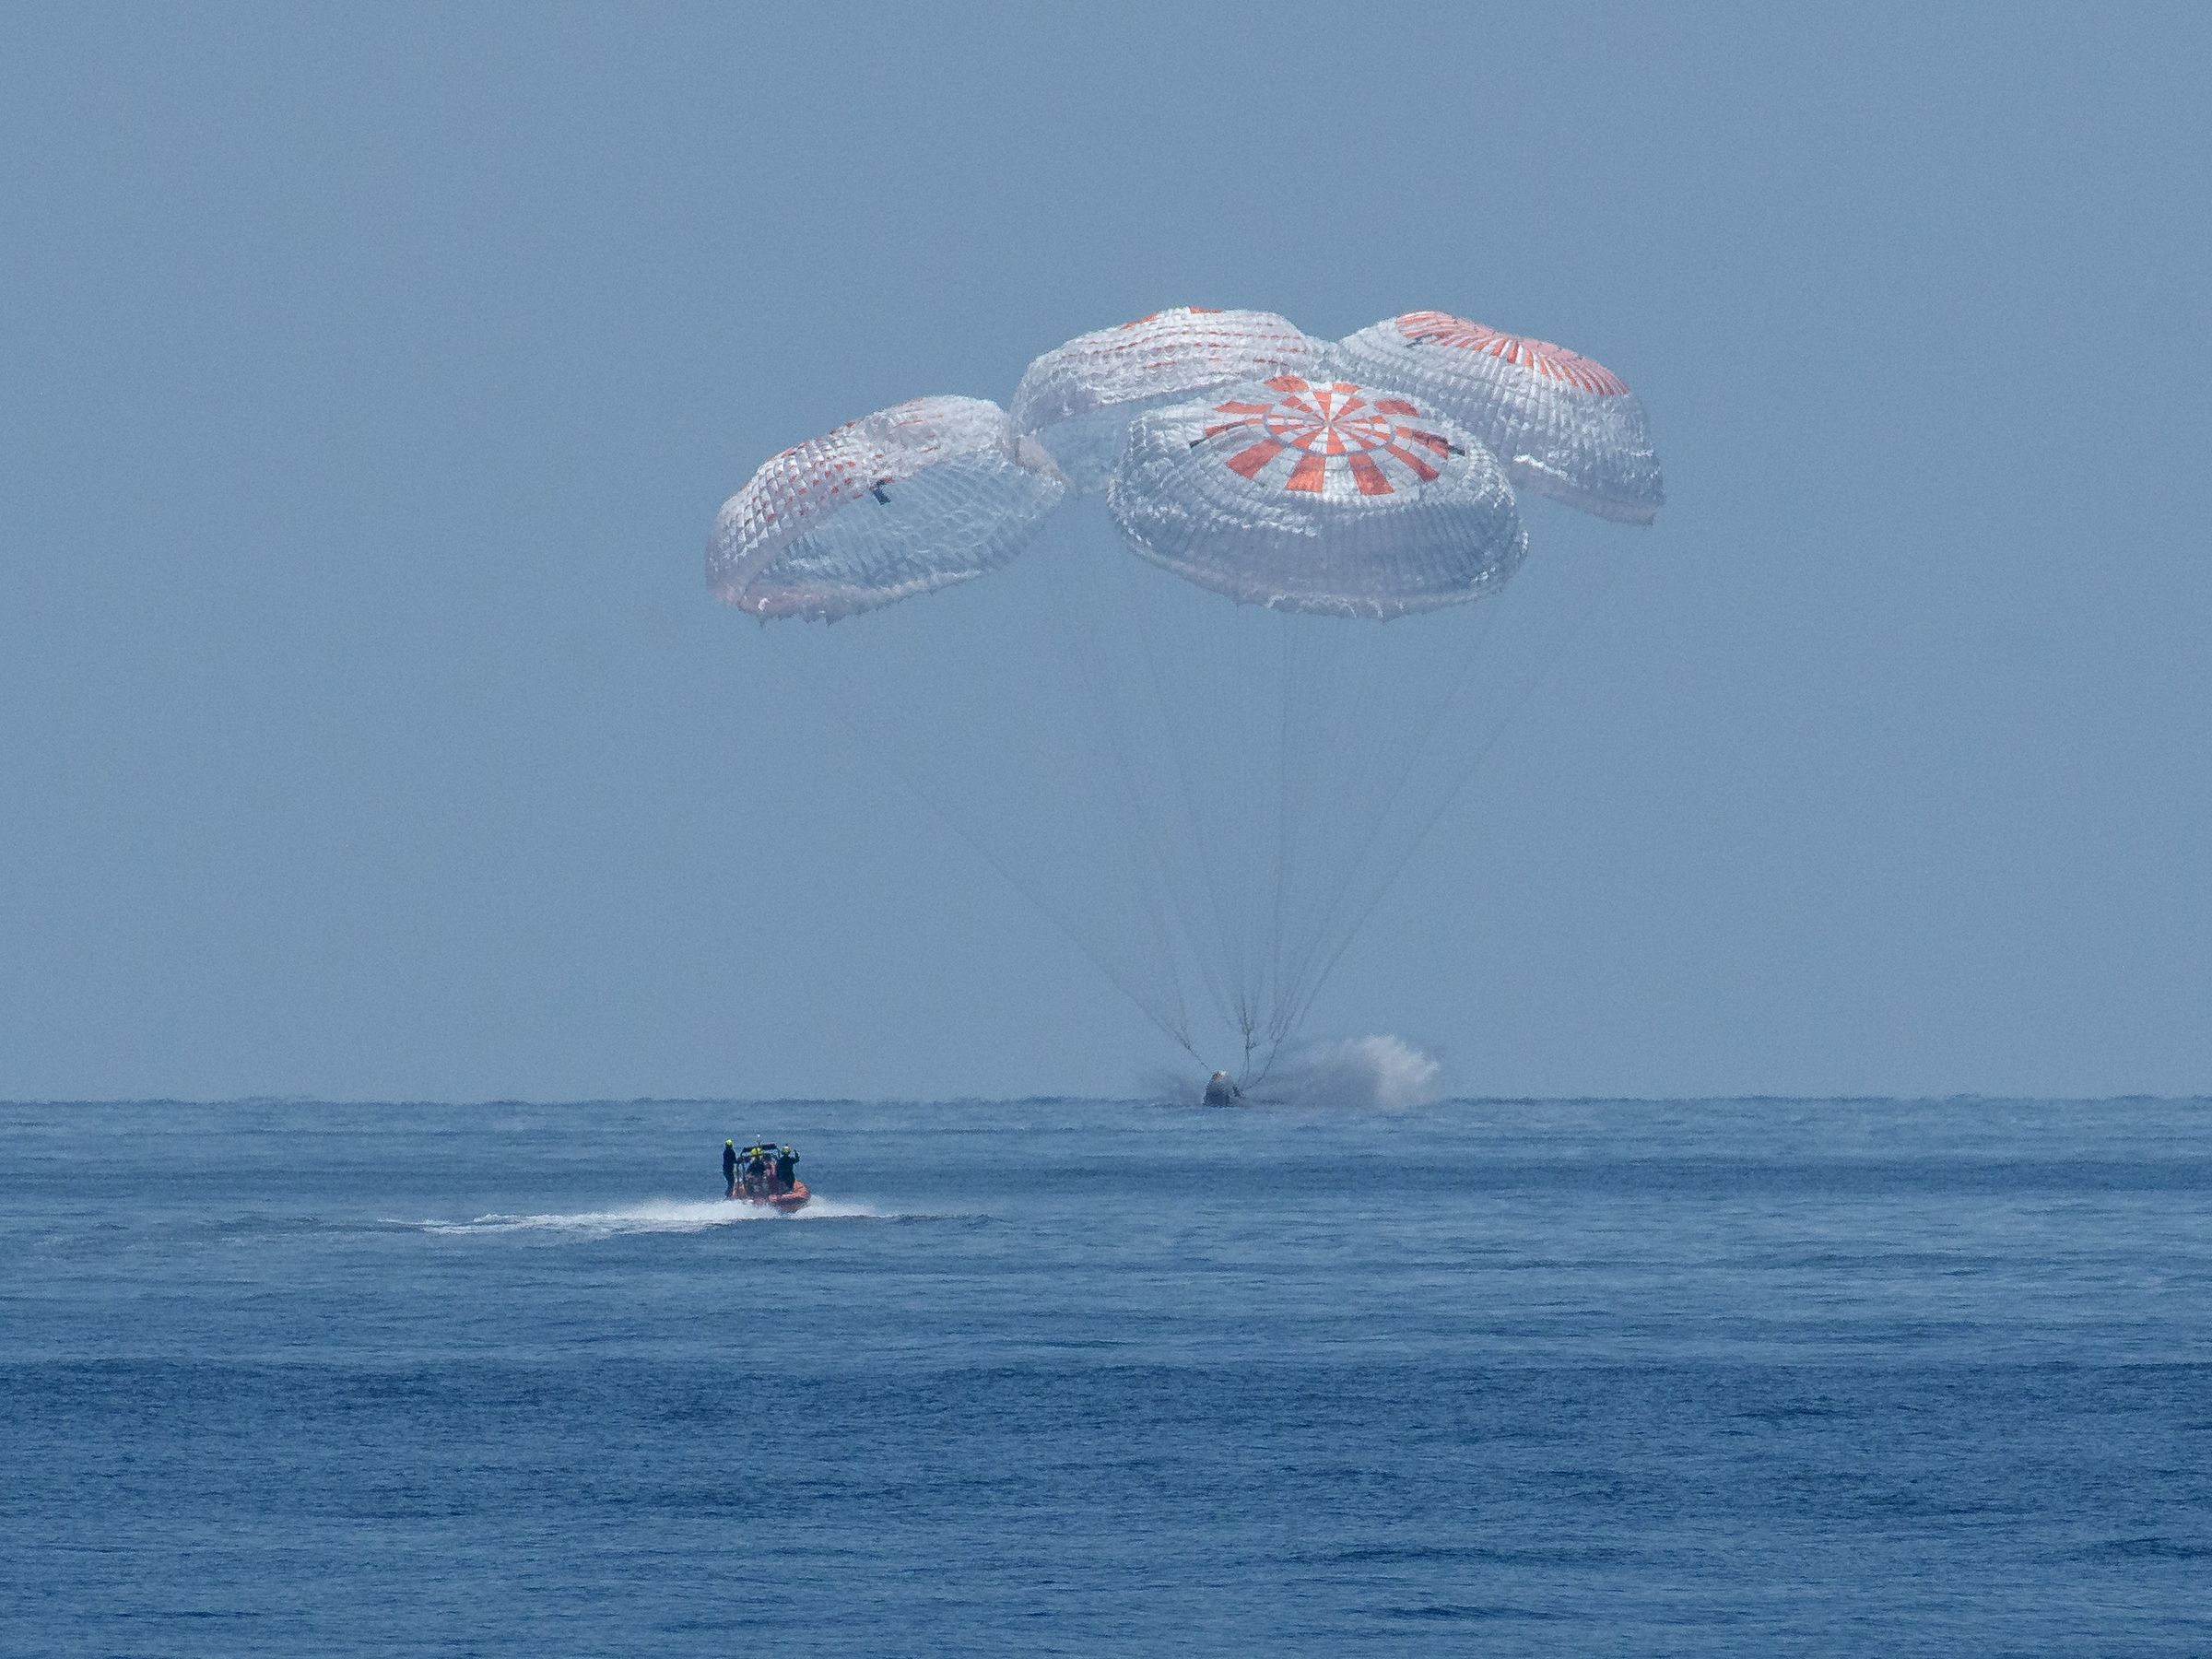 SpaceX’s Crew Dragon splashing down in August after taking Bob Behnken and Doug Hurley to the International Space Station.